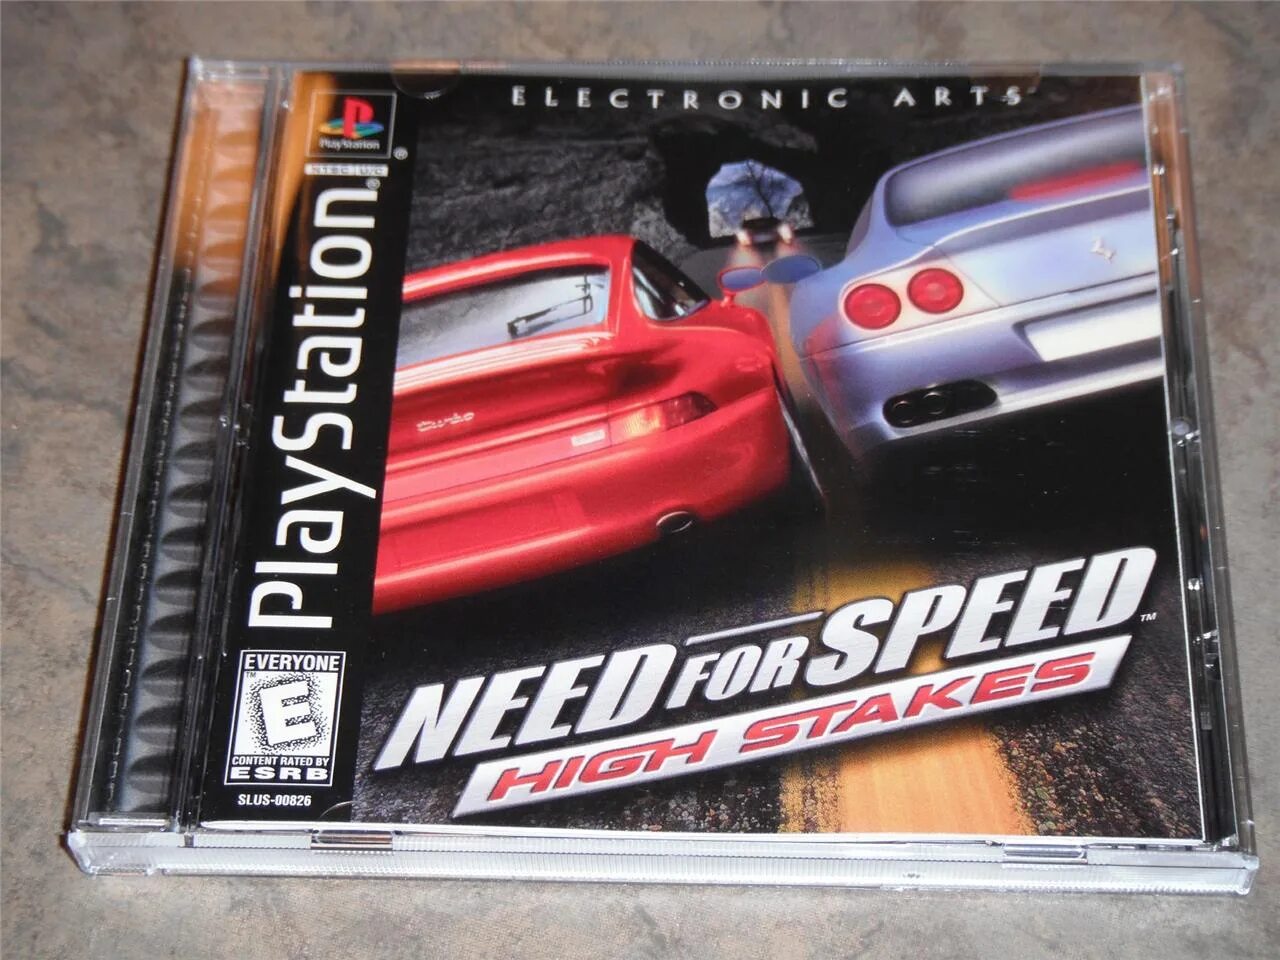 High stakes ps1. PLAYSTATION 1 диск need for Speed High stakes. Need for Speed High stakes ps1. NFS 4 High stakes ps1. NFS High stakes ps1 обложка.